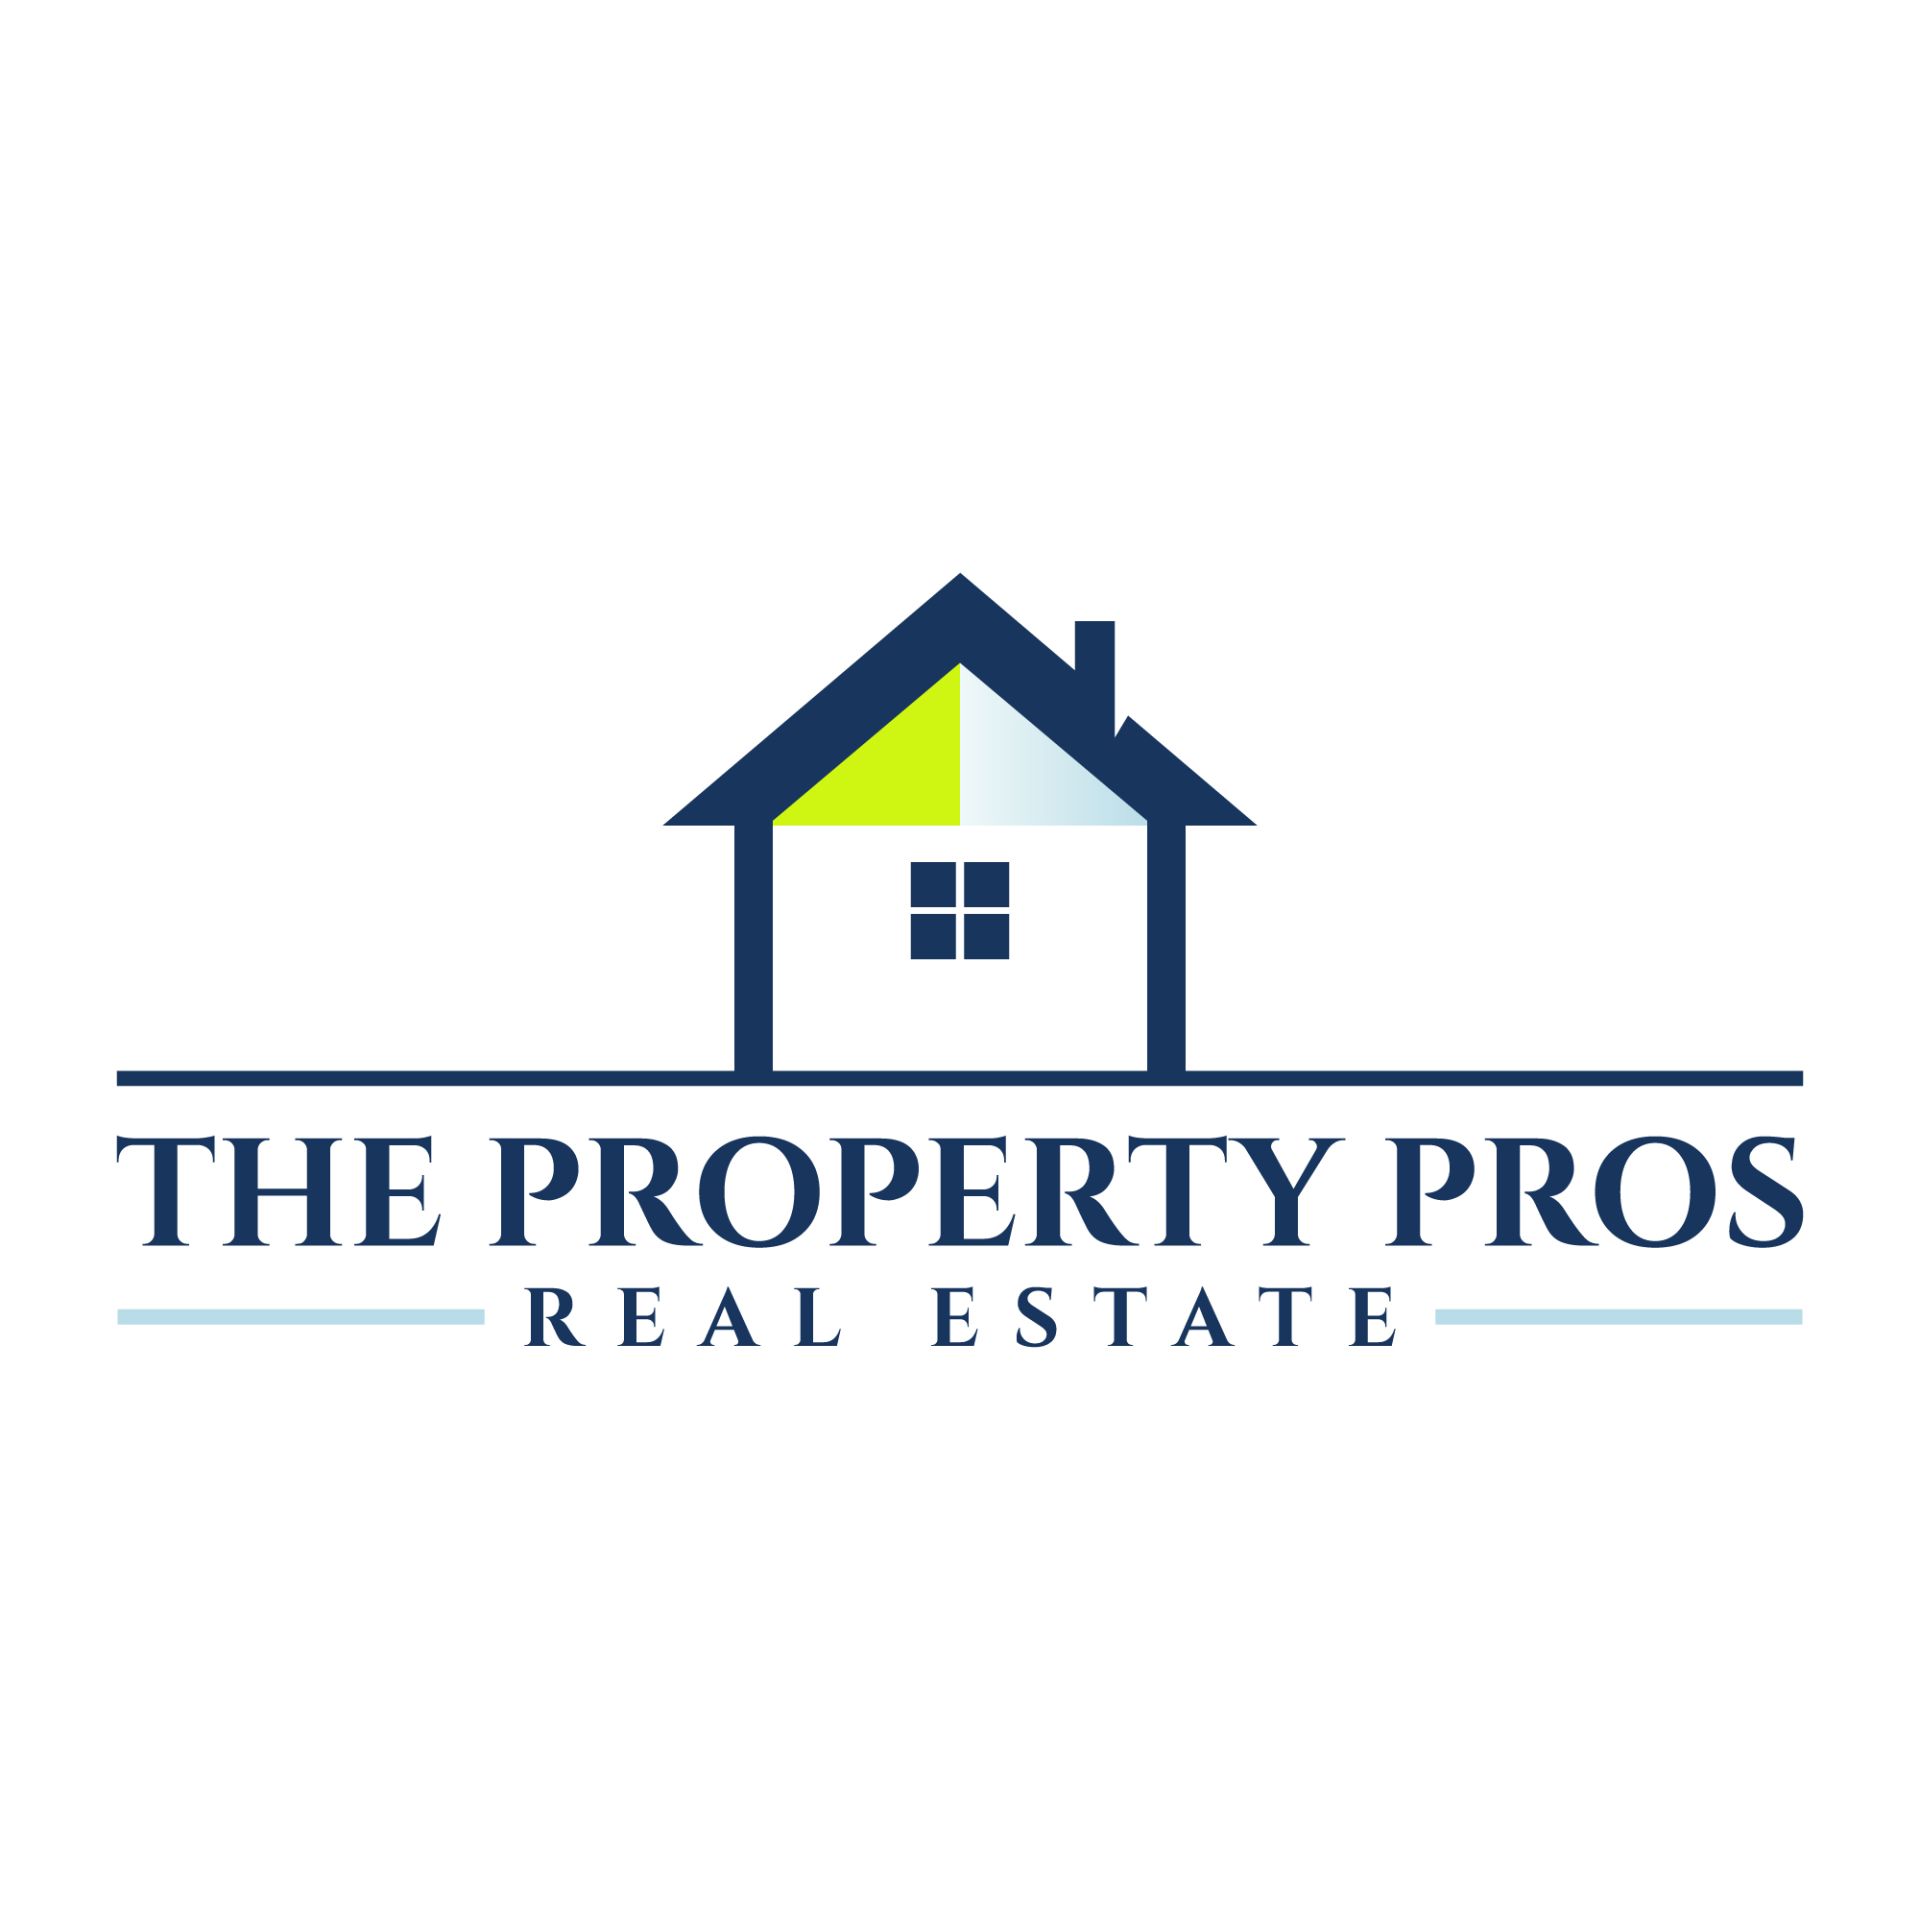 The Property Pros Real Estate